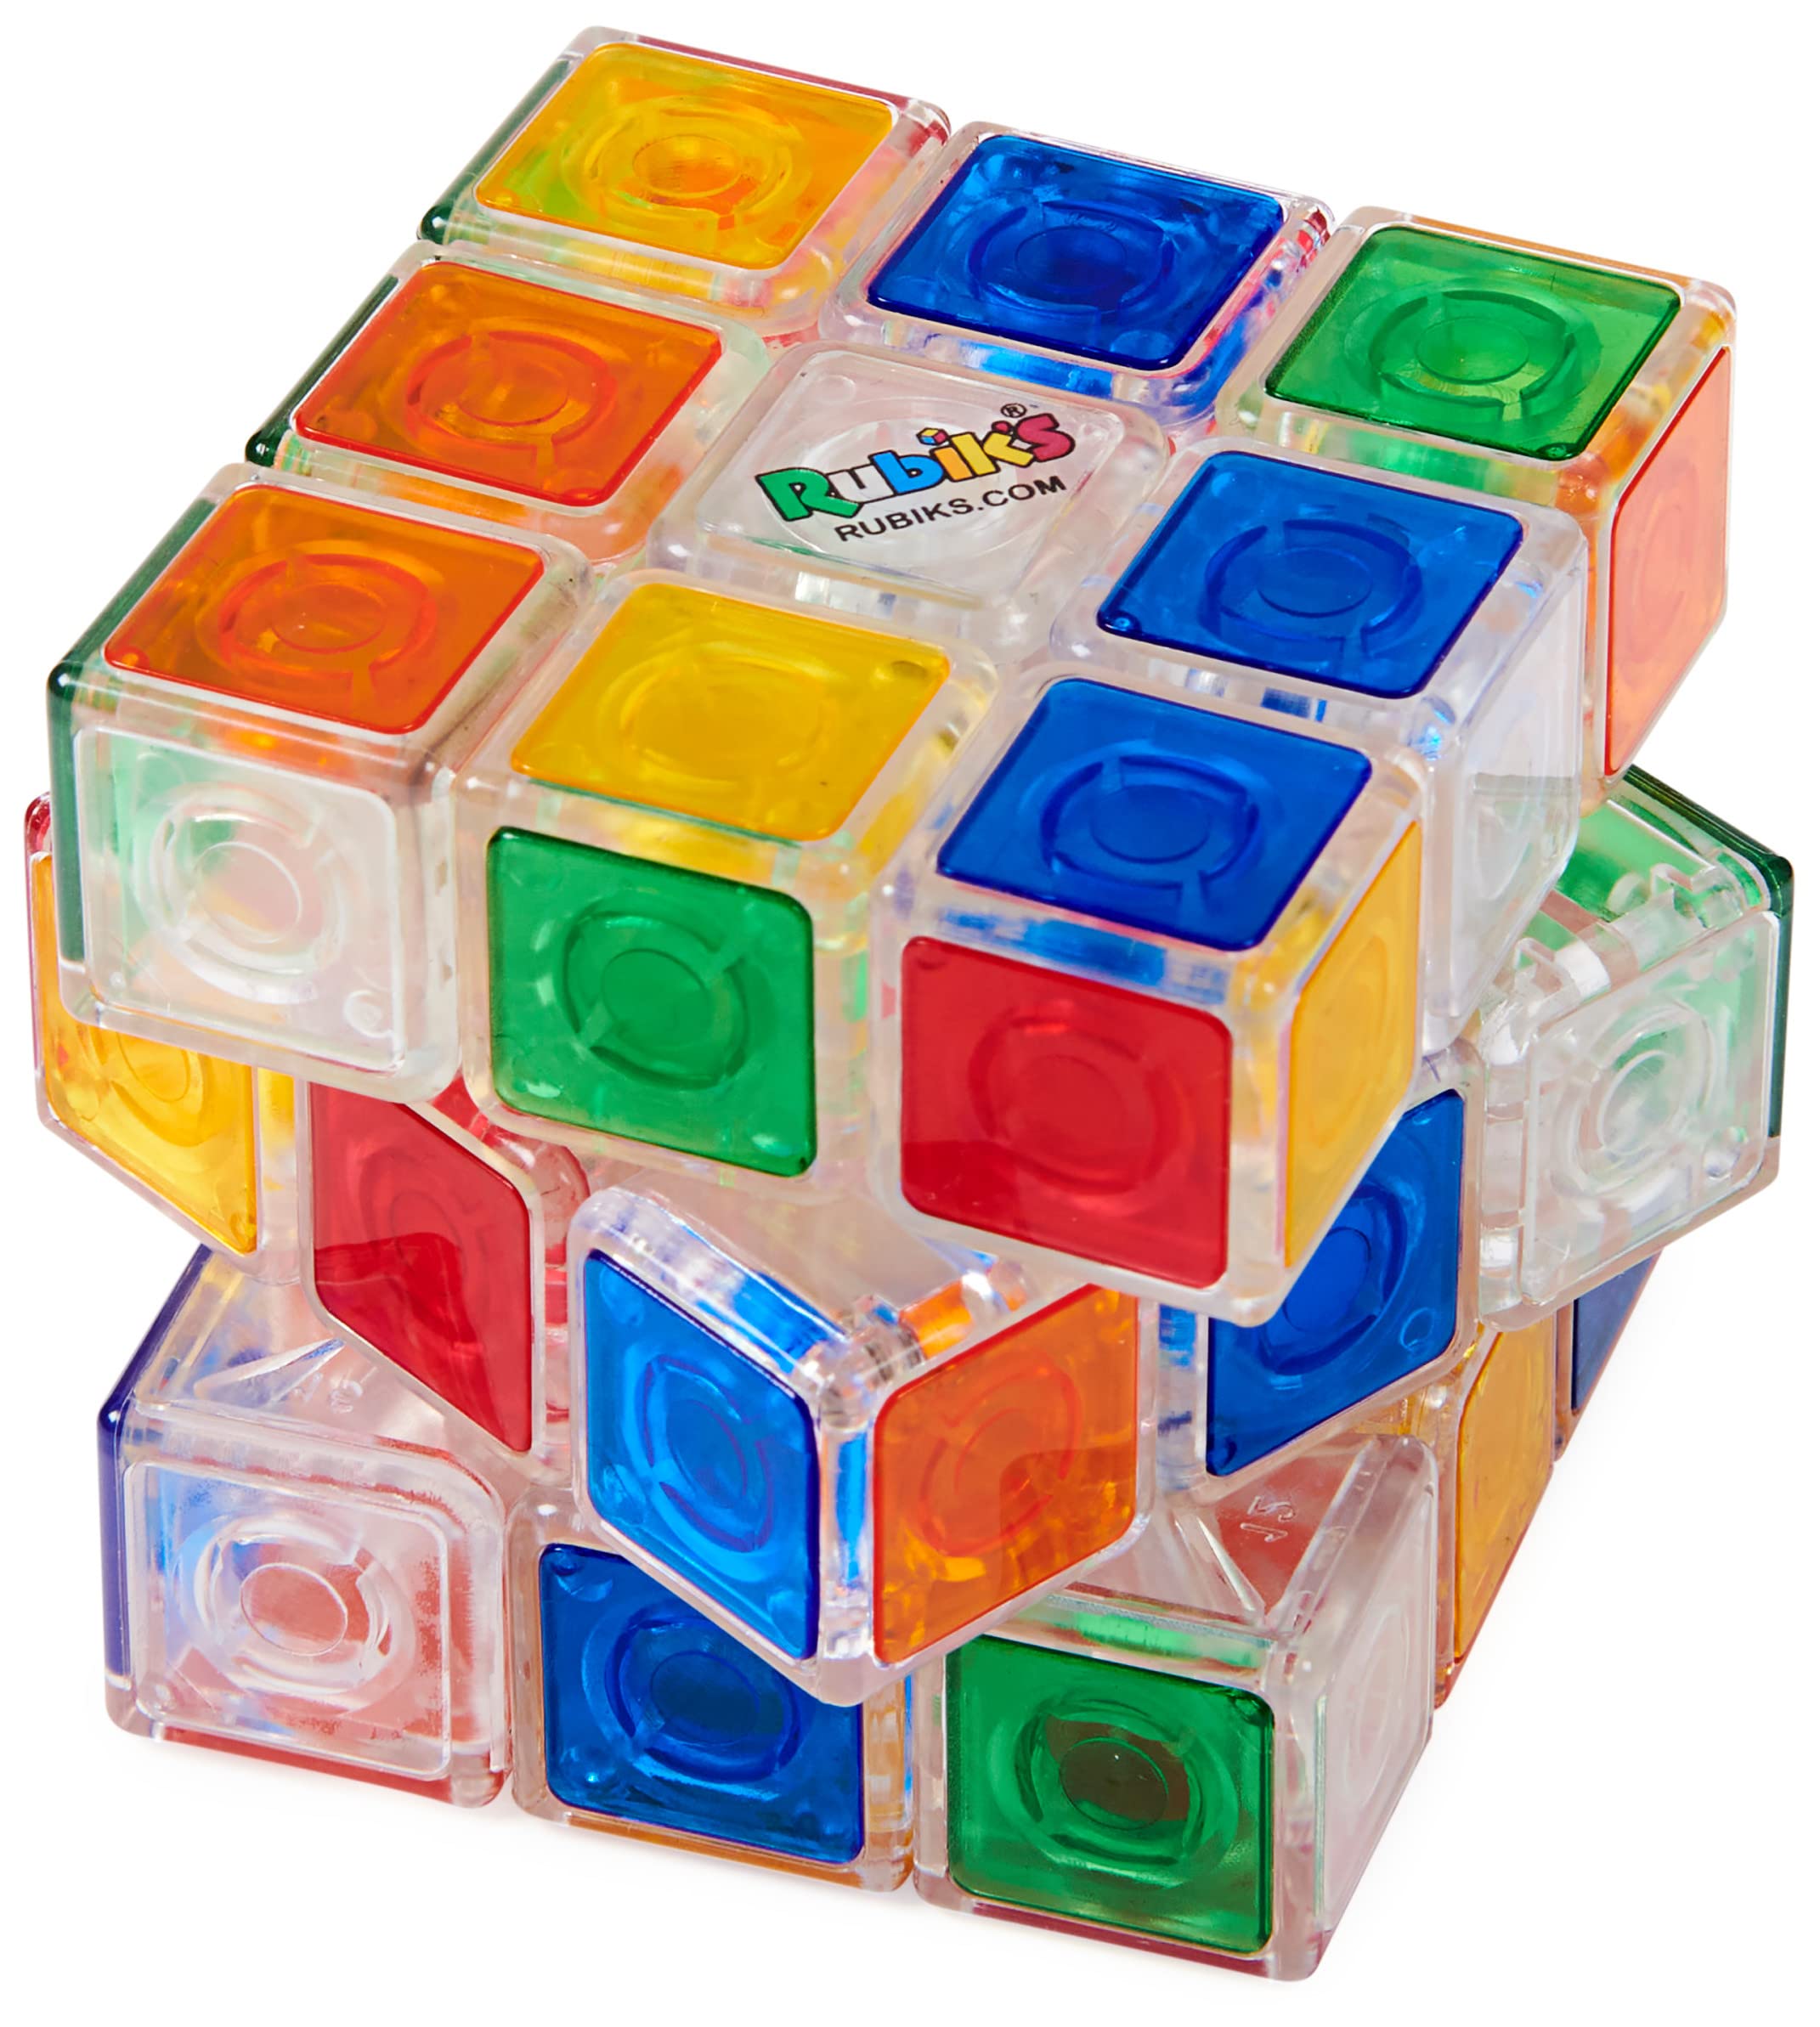 Rubikââ‚¬â„¢s Crystal, New Transparent 3x3 Cube Classic Color-Matching Problem-Solving Brain Teaser Puzzle Game Toy, for Kids and Adults Aged 8 and Up